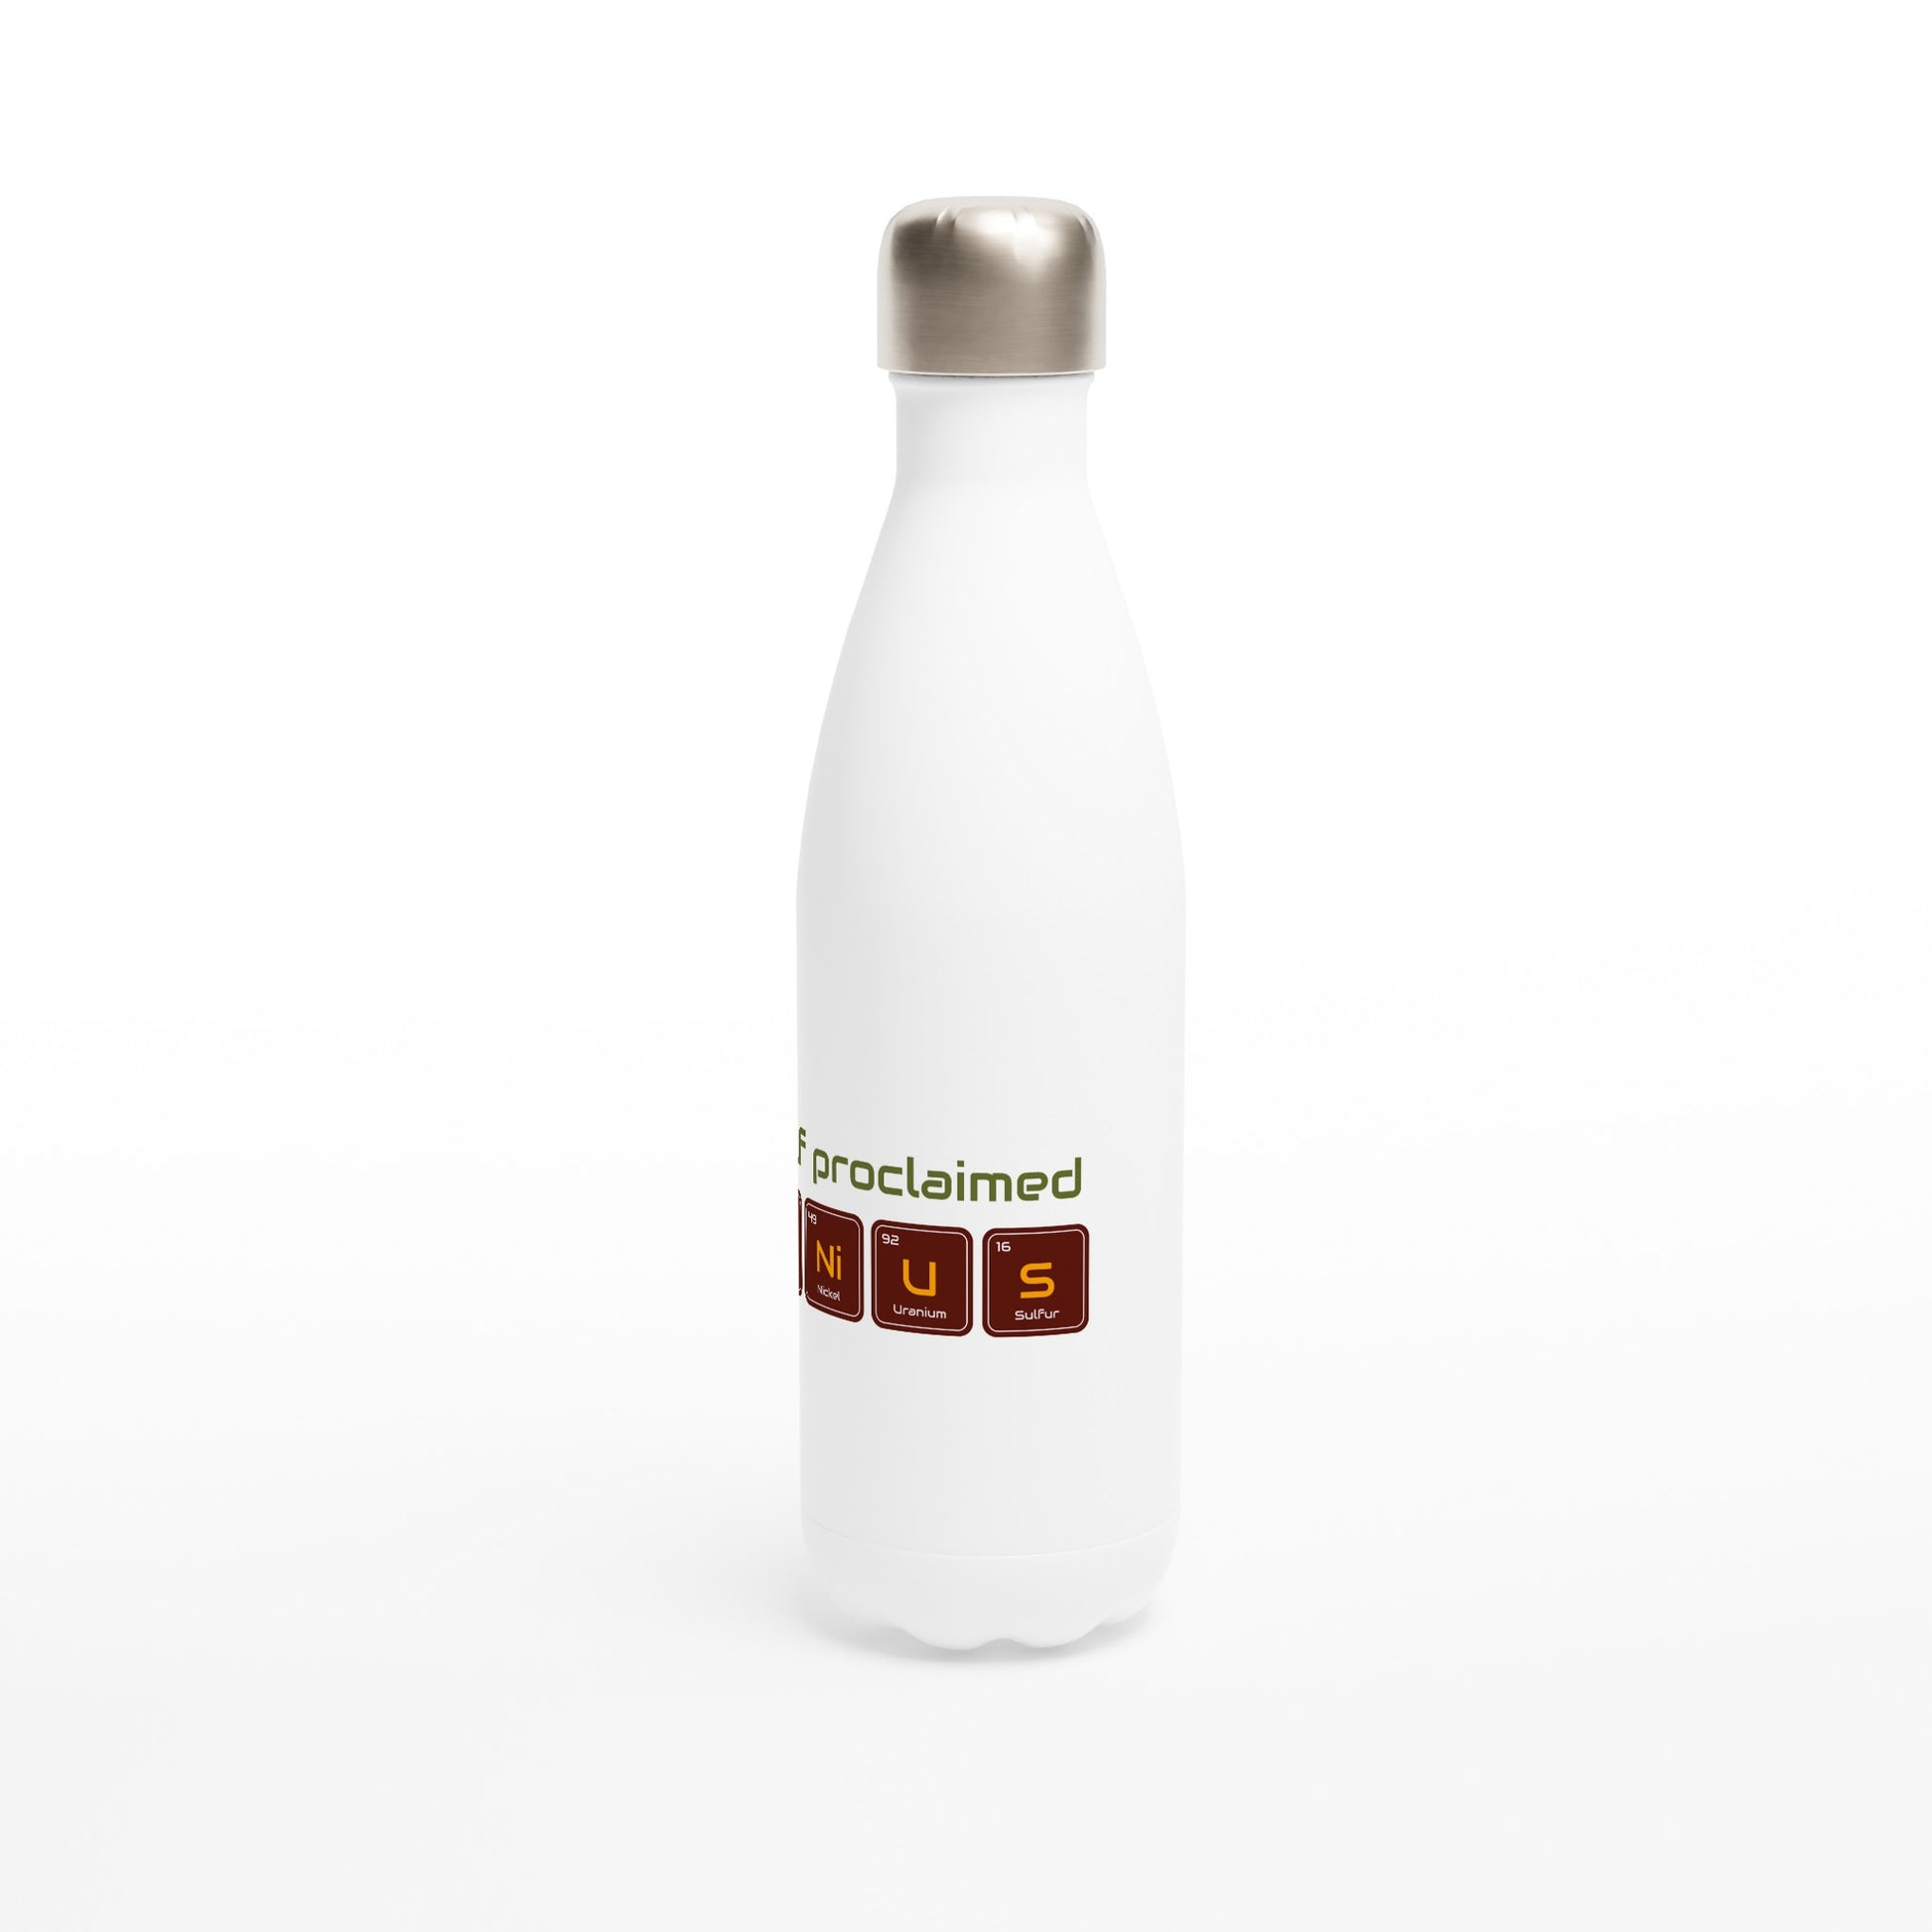 Self Proclaimed Genius, Periodic Table - White 17oz Stainless Steel Water Bottle White Water Bottle Science